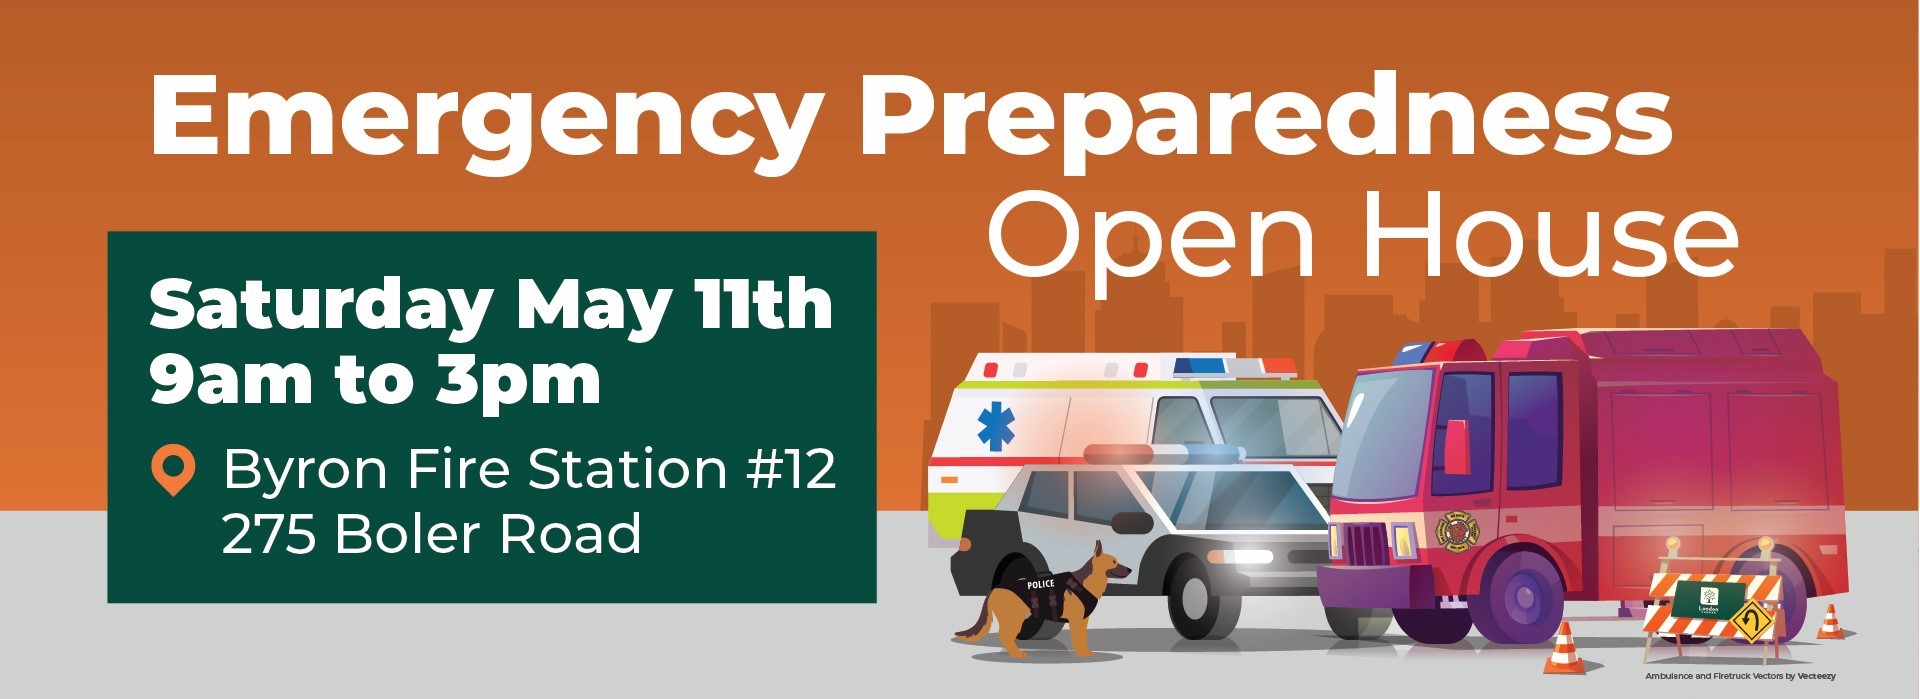 2023 Emergency Preparedness Open House Graphic Design, with copy that reads 'Emergency Preparedness Open House on Saturday, May 11th from 9 a.m. to 3 p.m. at Byron Fire Station Number 12" and icons of emergency vehicles. 